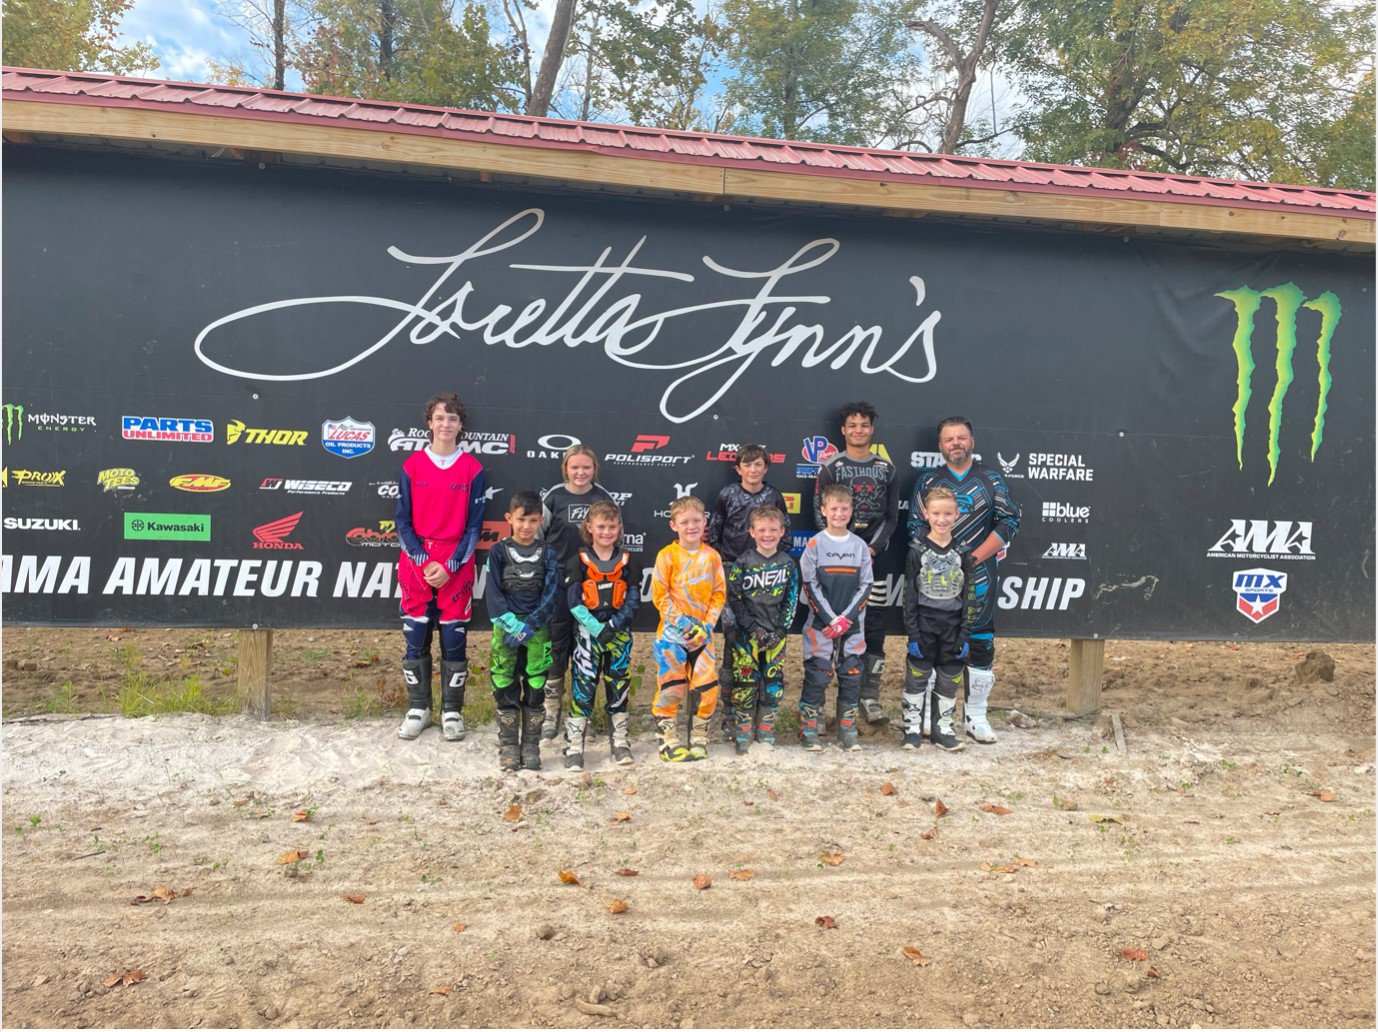 This past October, the group of 11 riders that raised the most money was invited to a USMCA learn-to-ride clinic at Loretta Lynn’s Ranch. Photo courtesy USMCA.